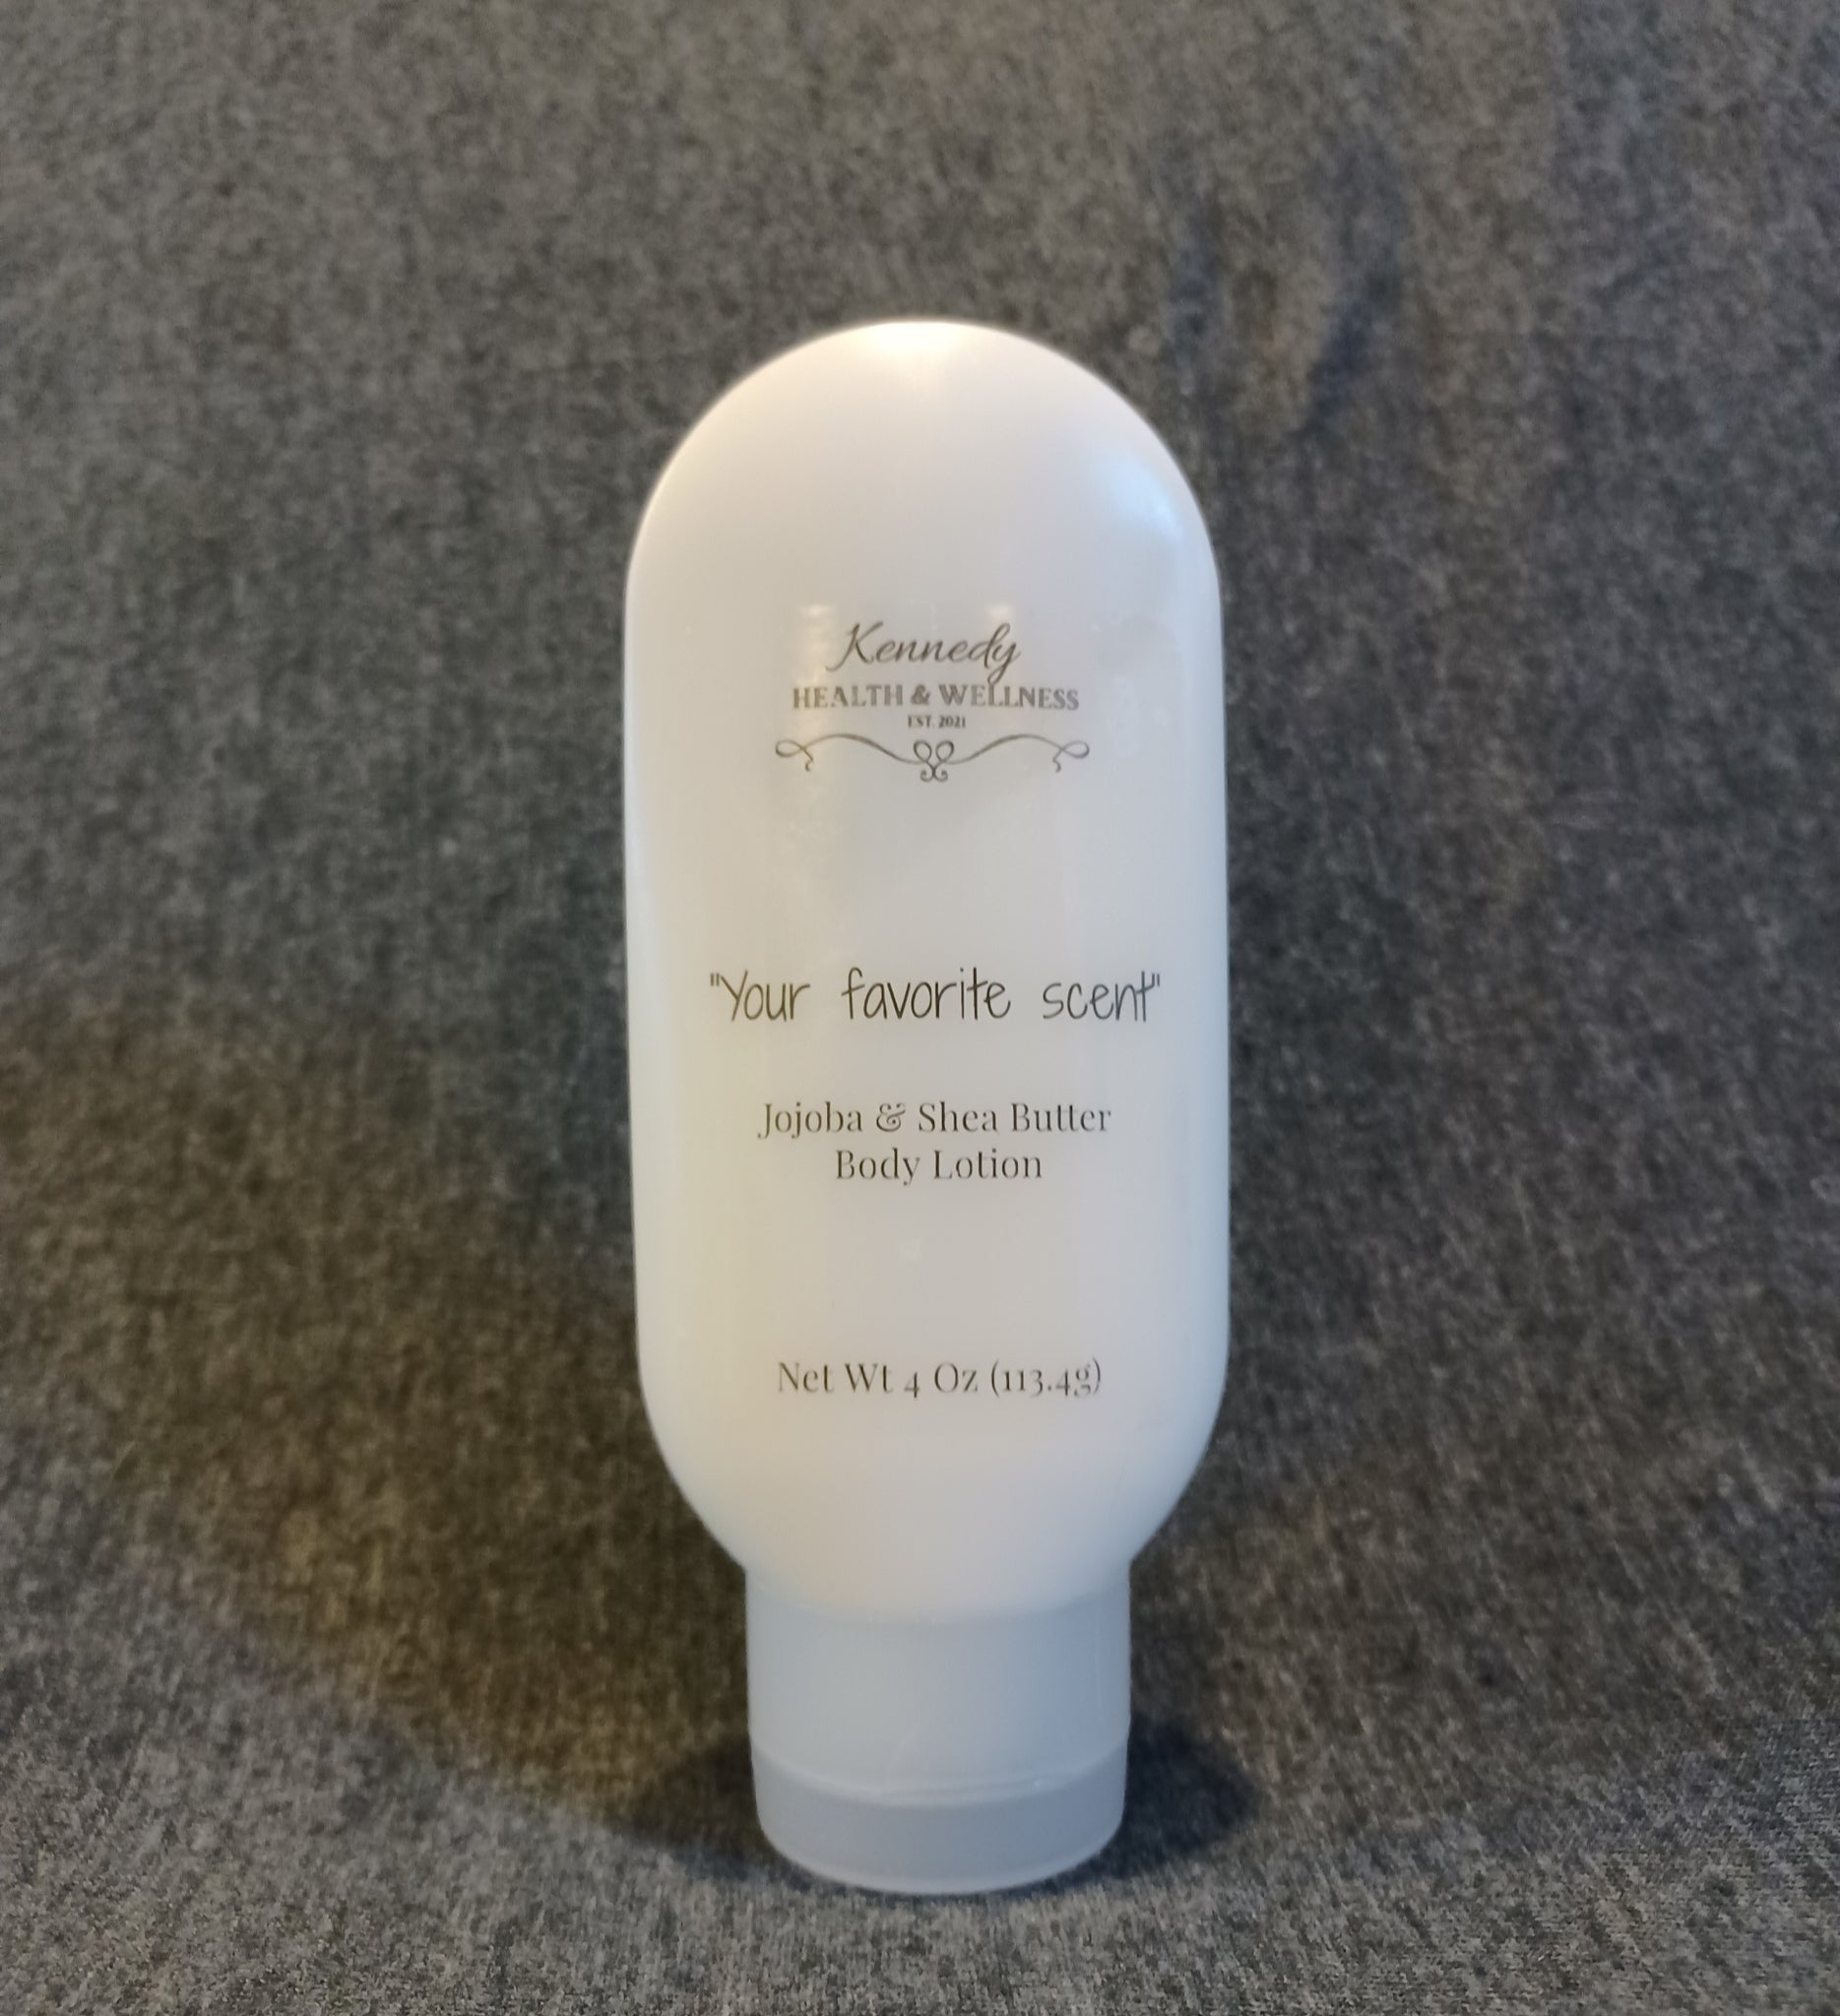 Does it matter which body lotion I use?, Health & wellbeing